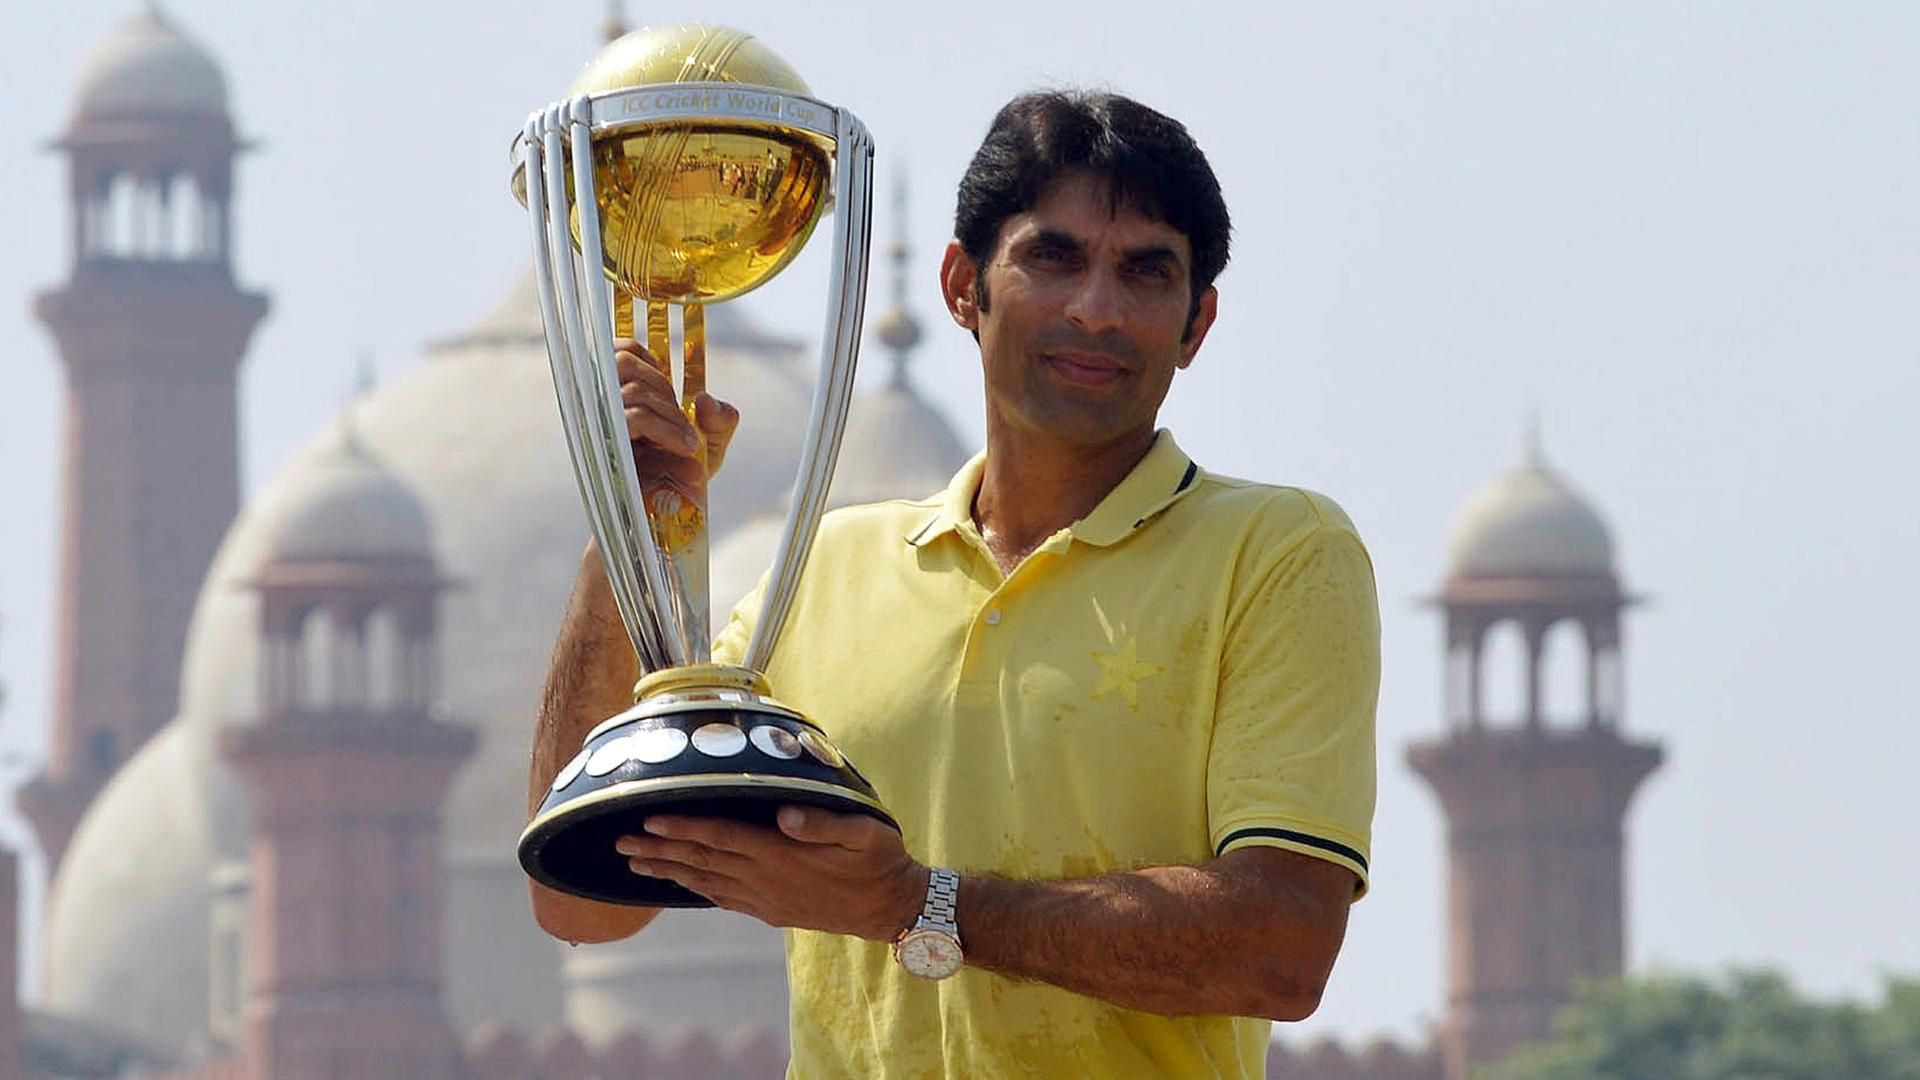 misbah-ul-haq-with-trophy-hd-wallpapers-2017